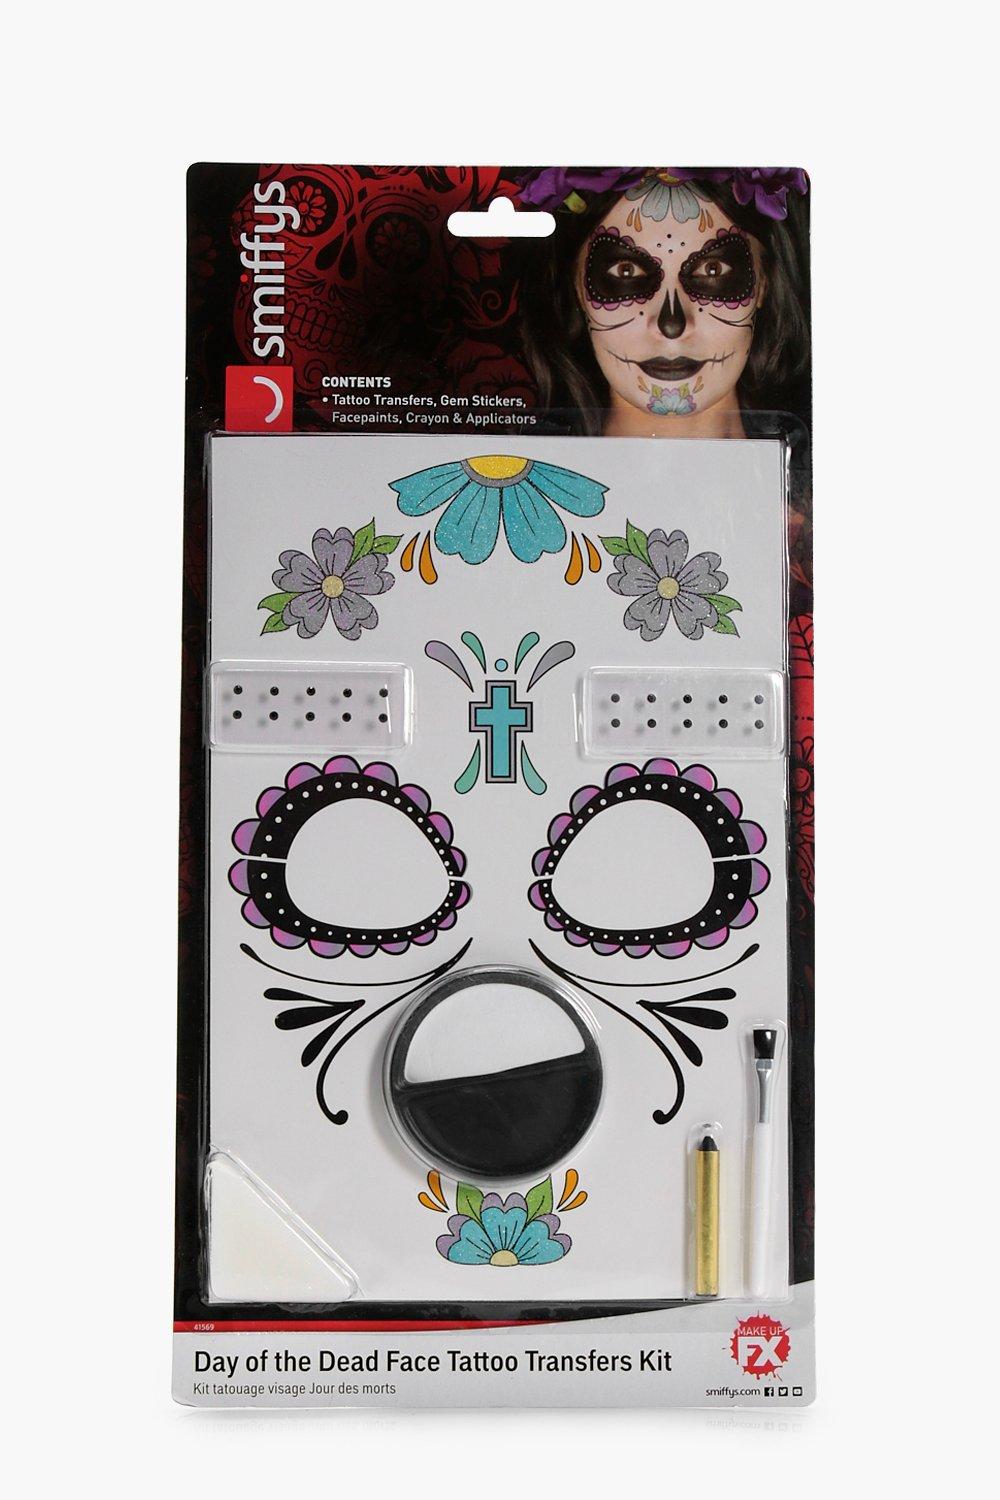 Day of the Dead Colour Tattoo Transfer Kit | Boohoo